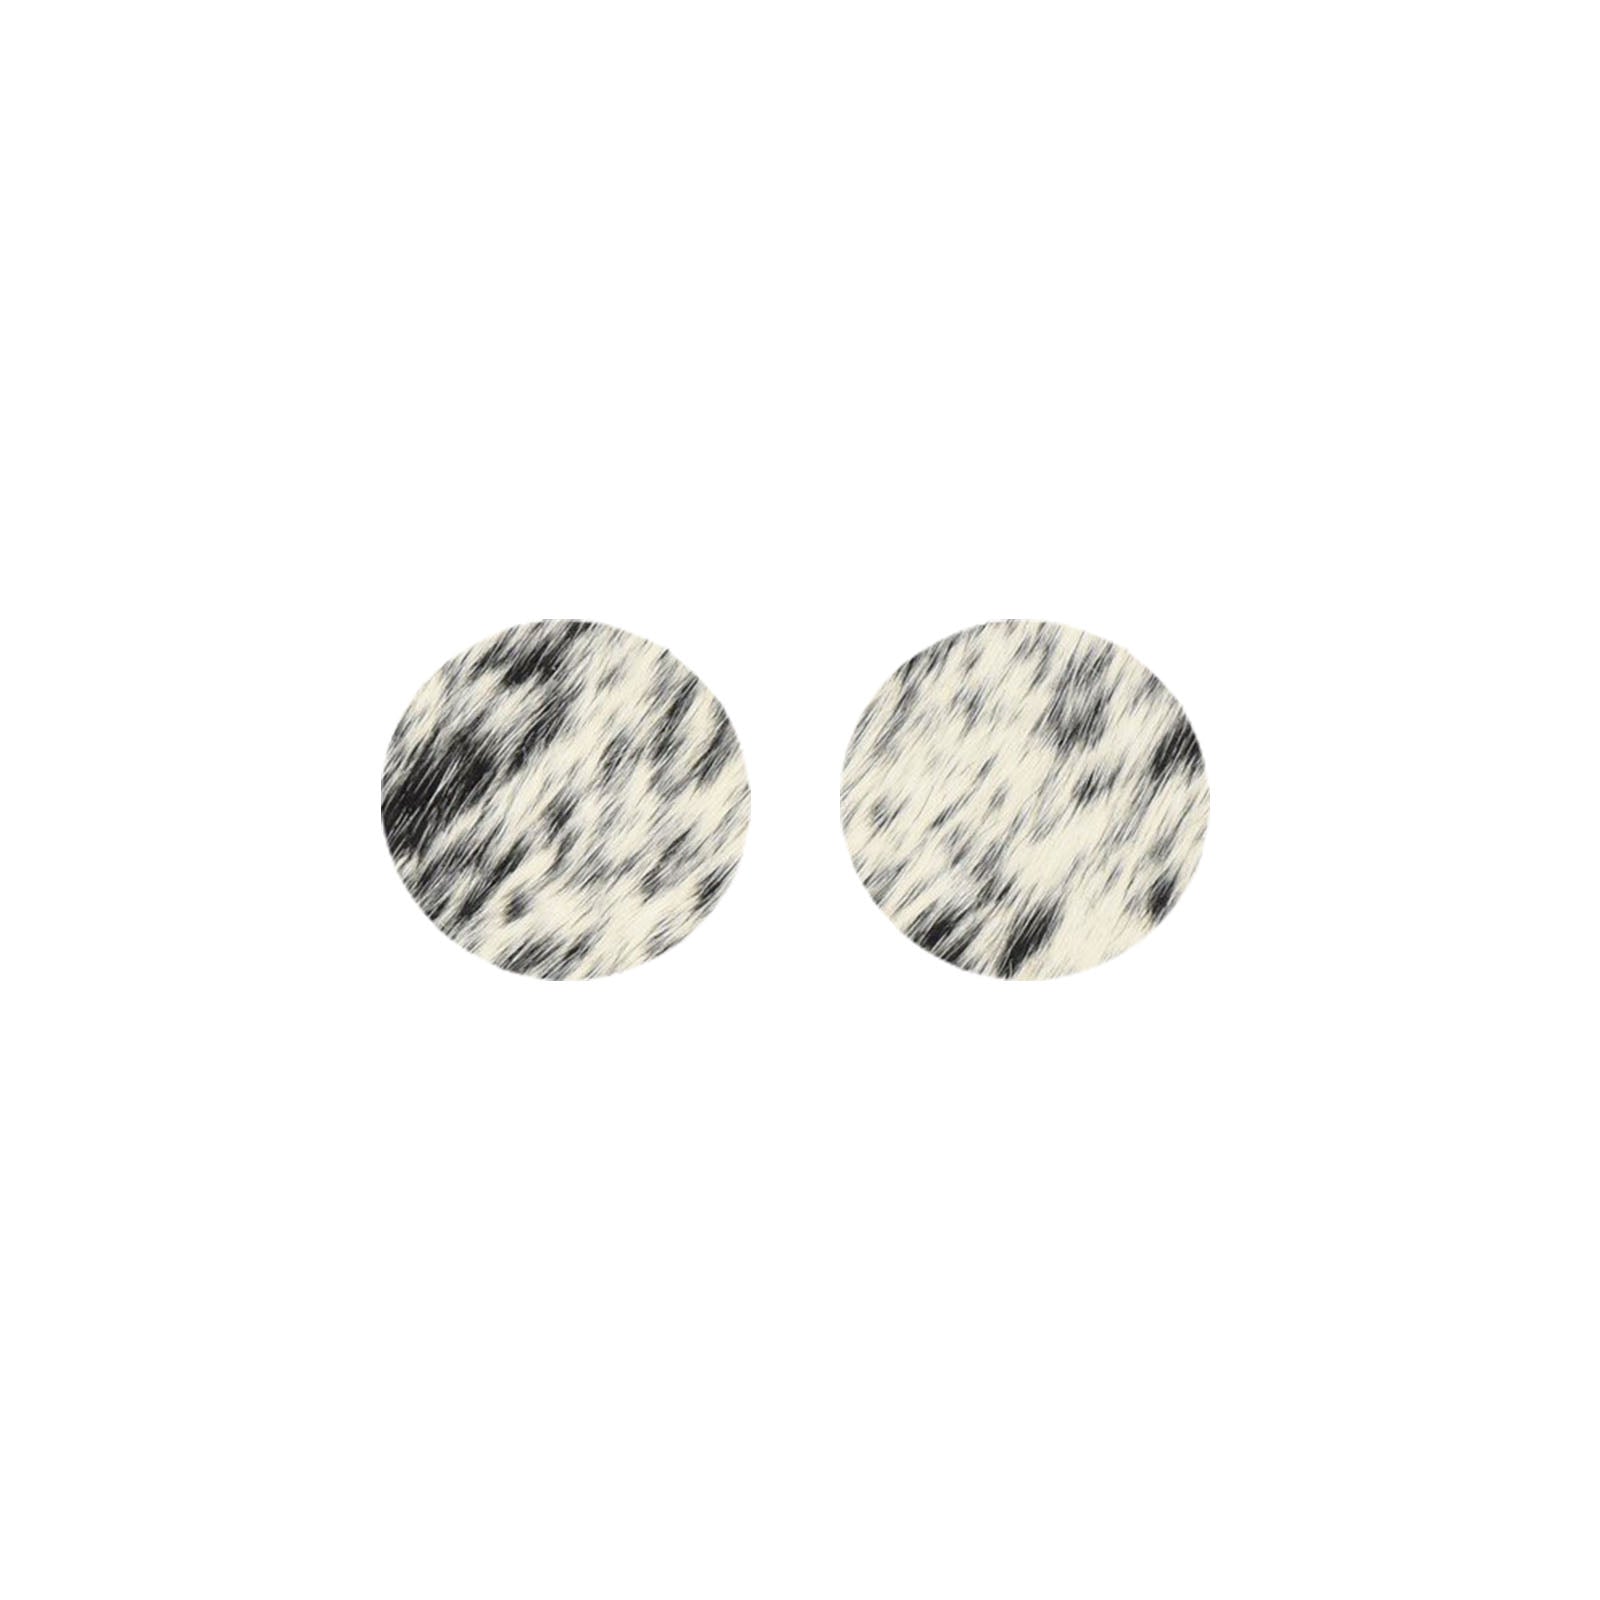 Spotted Light Black and Off White Hair On Die Cut Earrings, Medium Circle | The Leather Guy